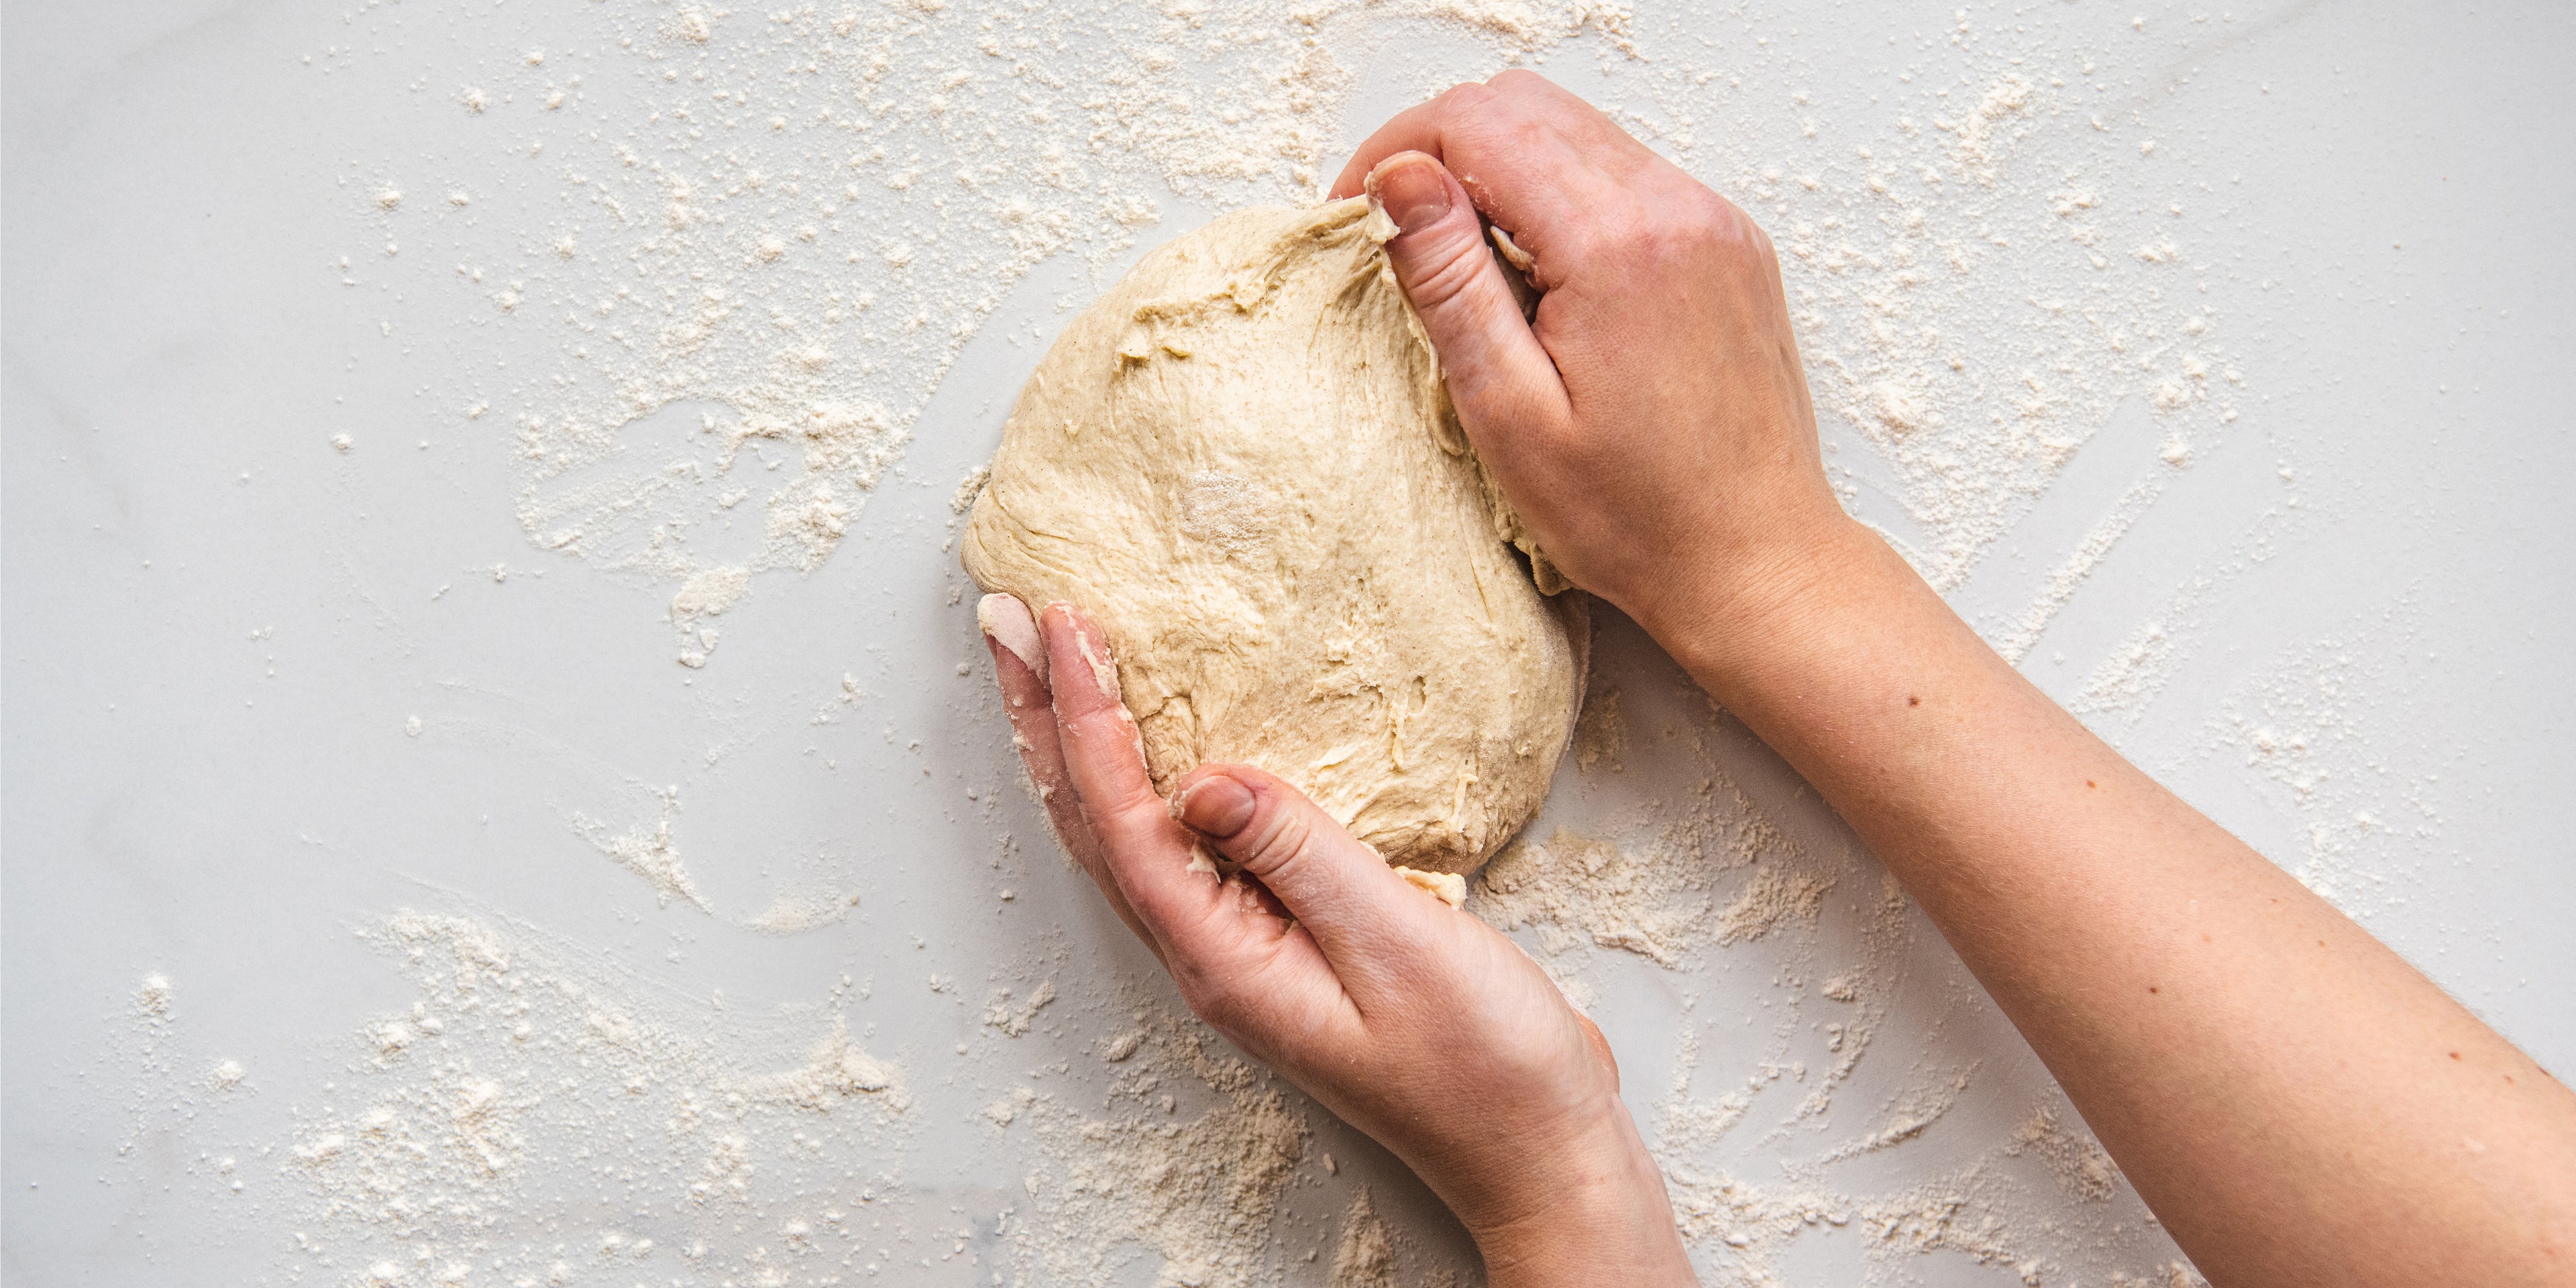 Top down view of hands kneading dough